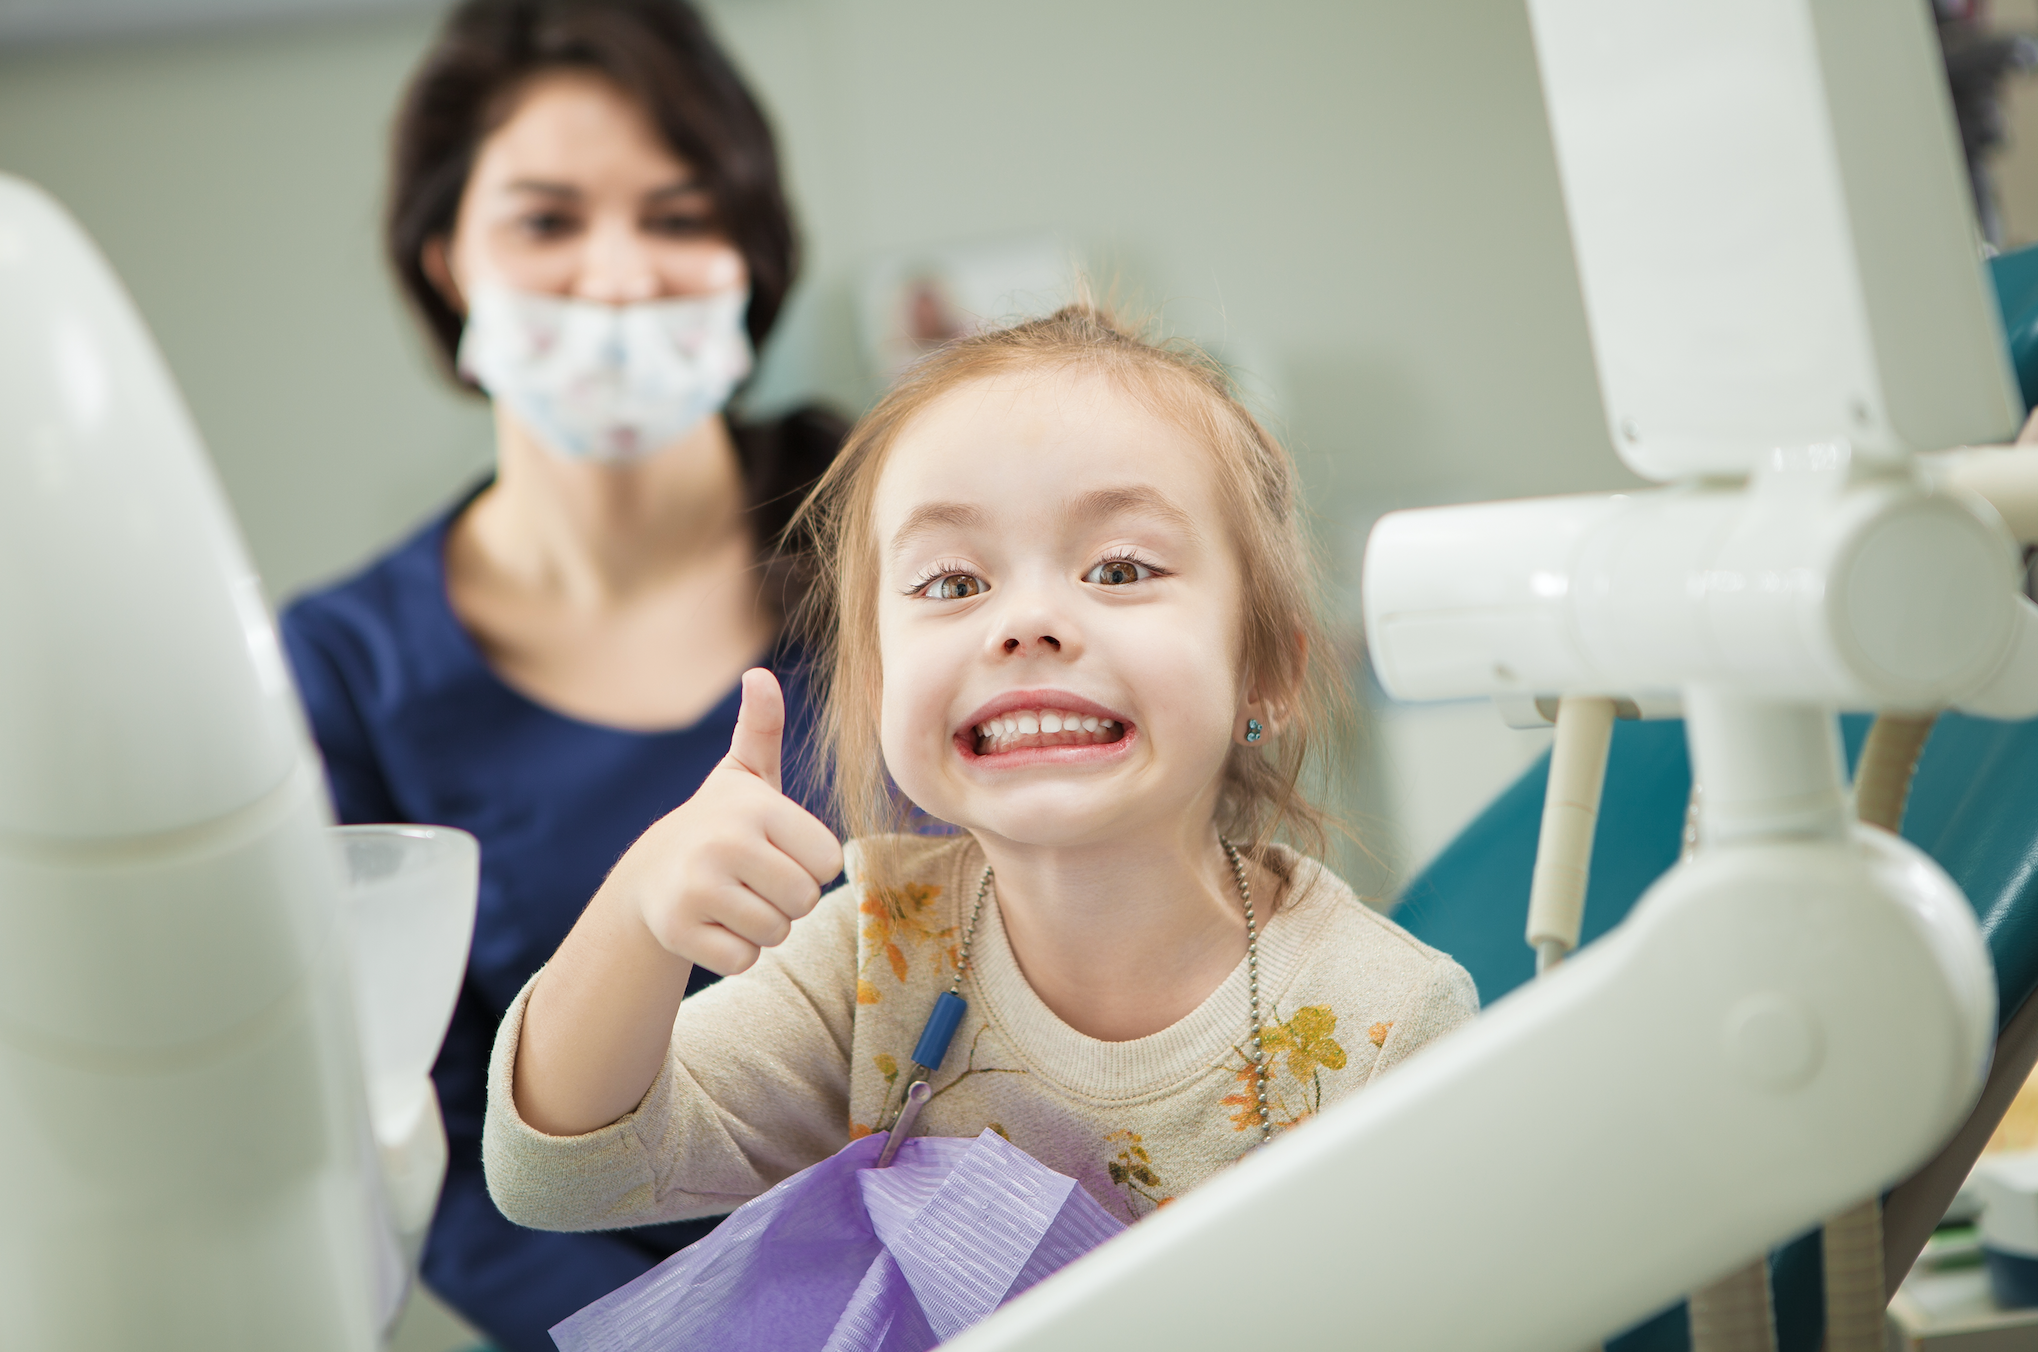 A young child sits in the dental chair, smiling with her thumbs-up sign.